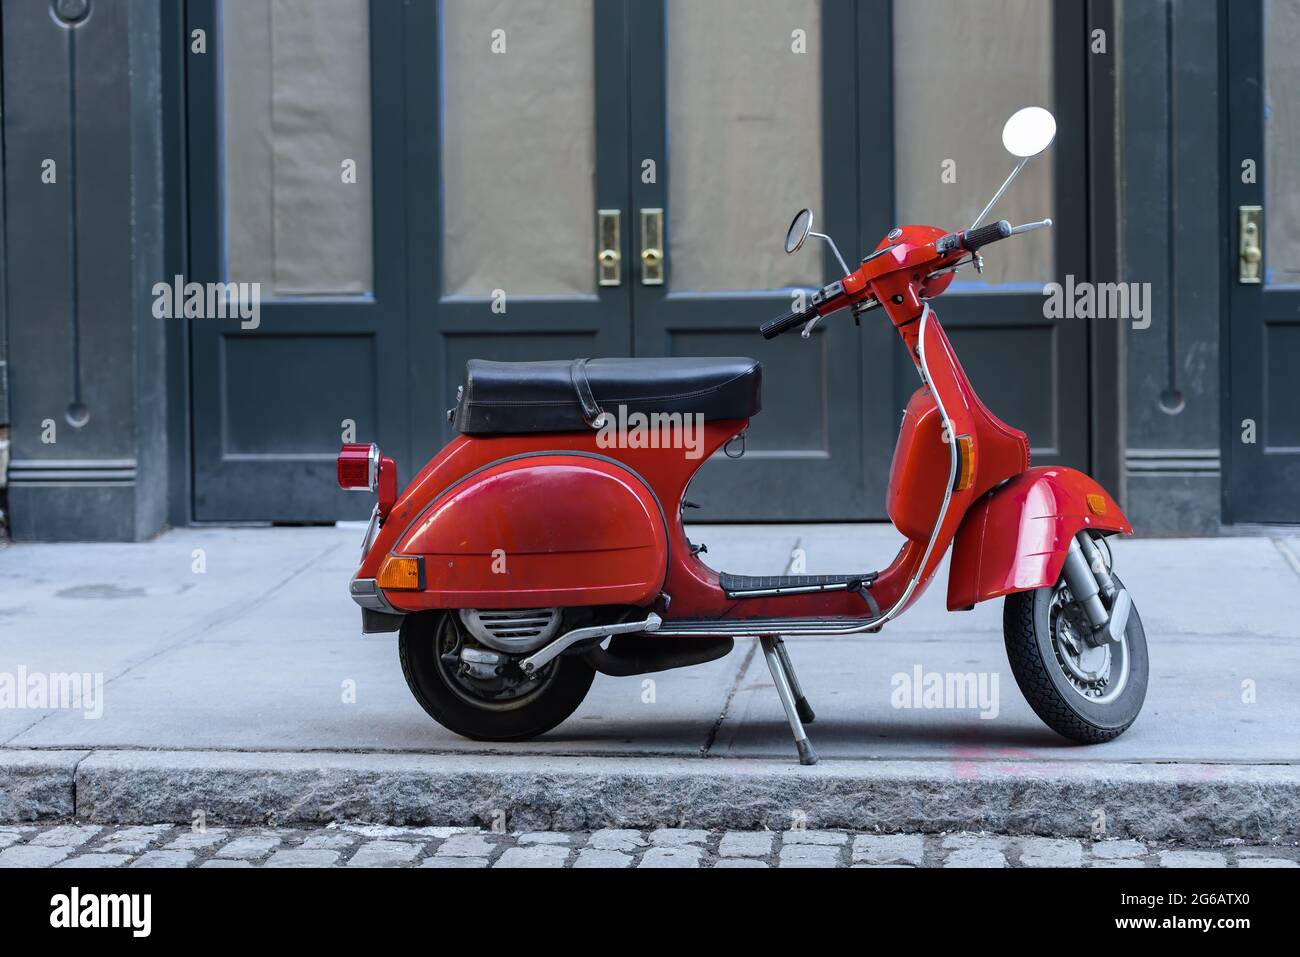 Small, red motor bike parked on a street in New York City. Stock Photo